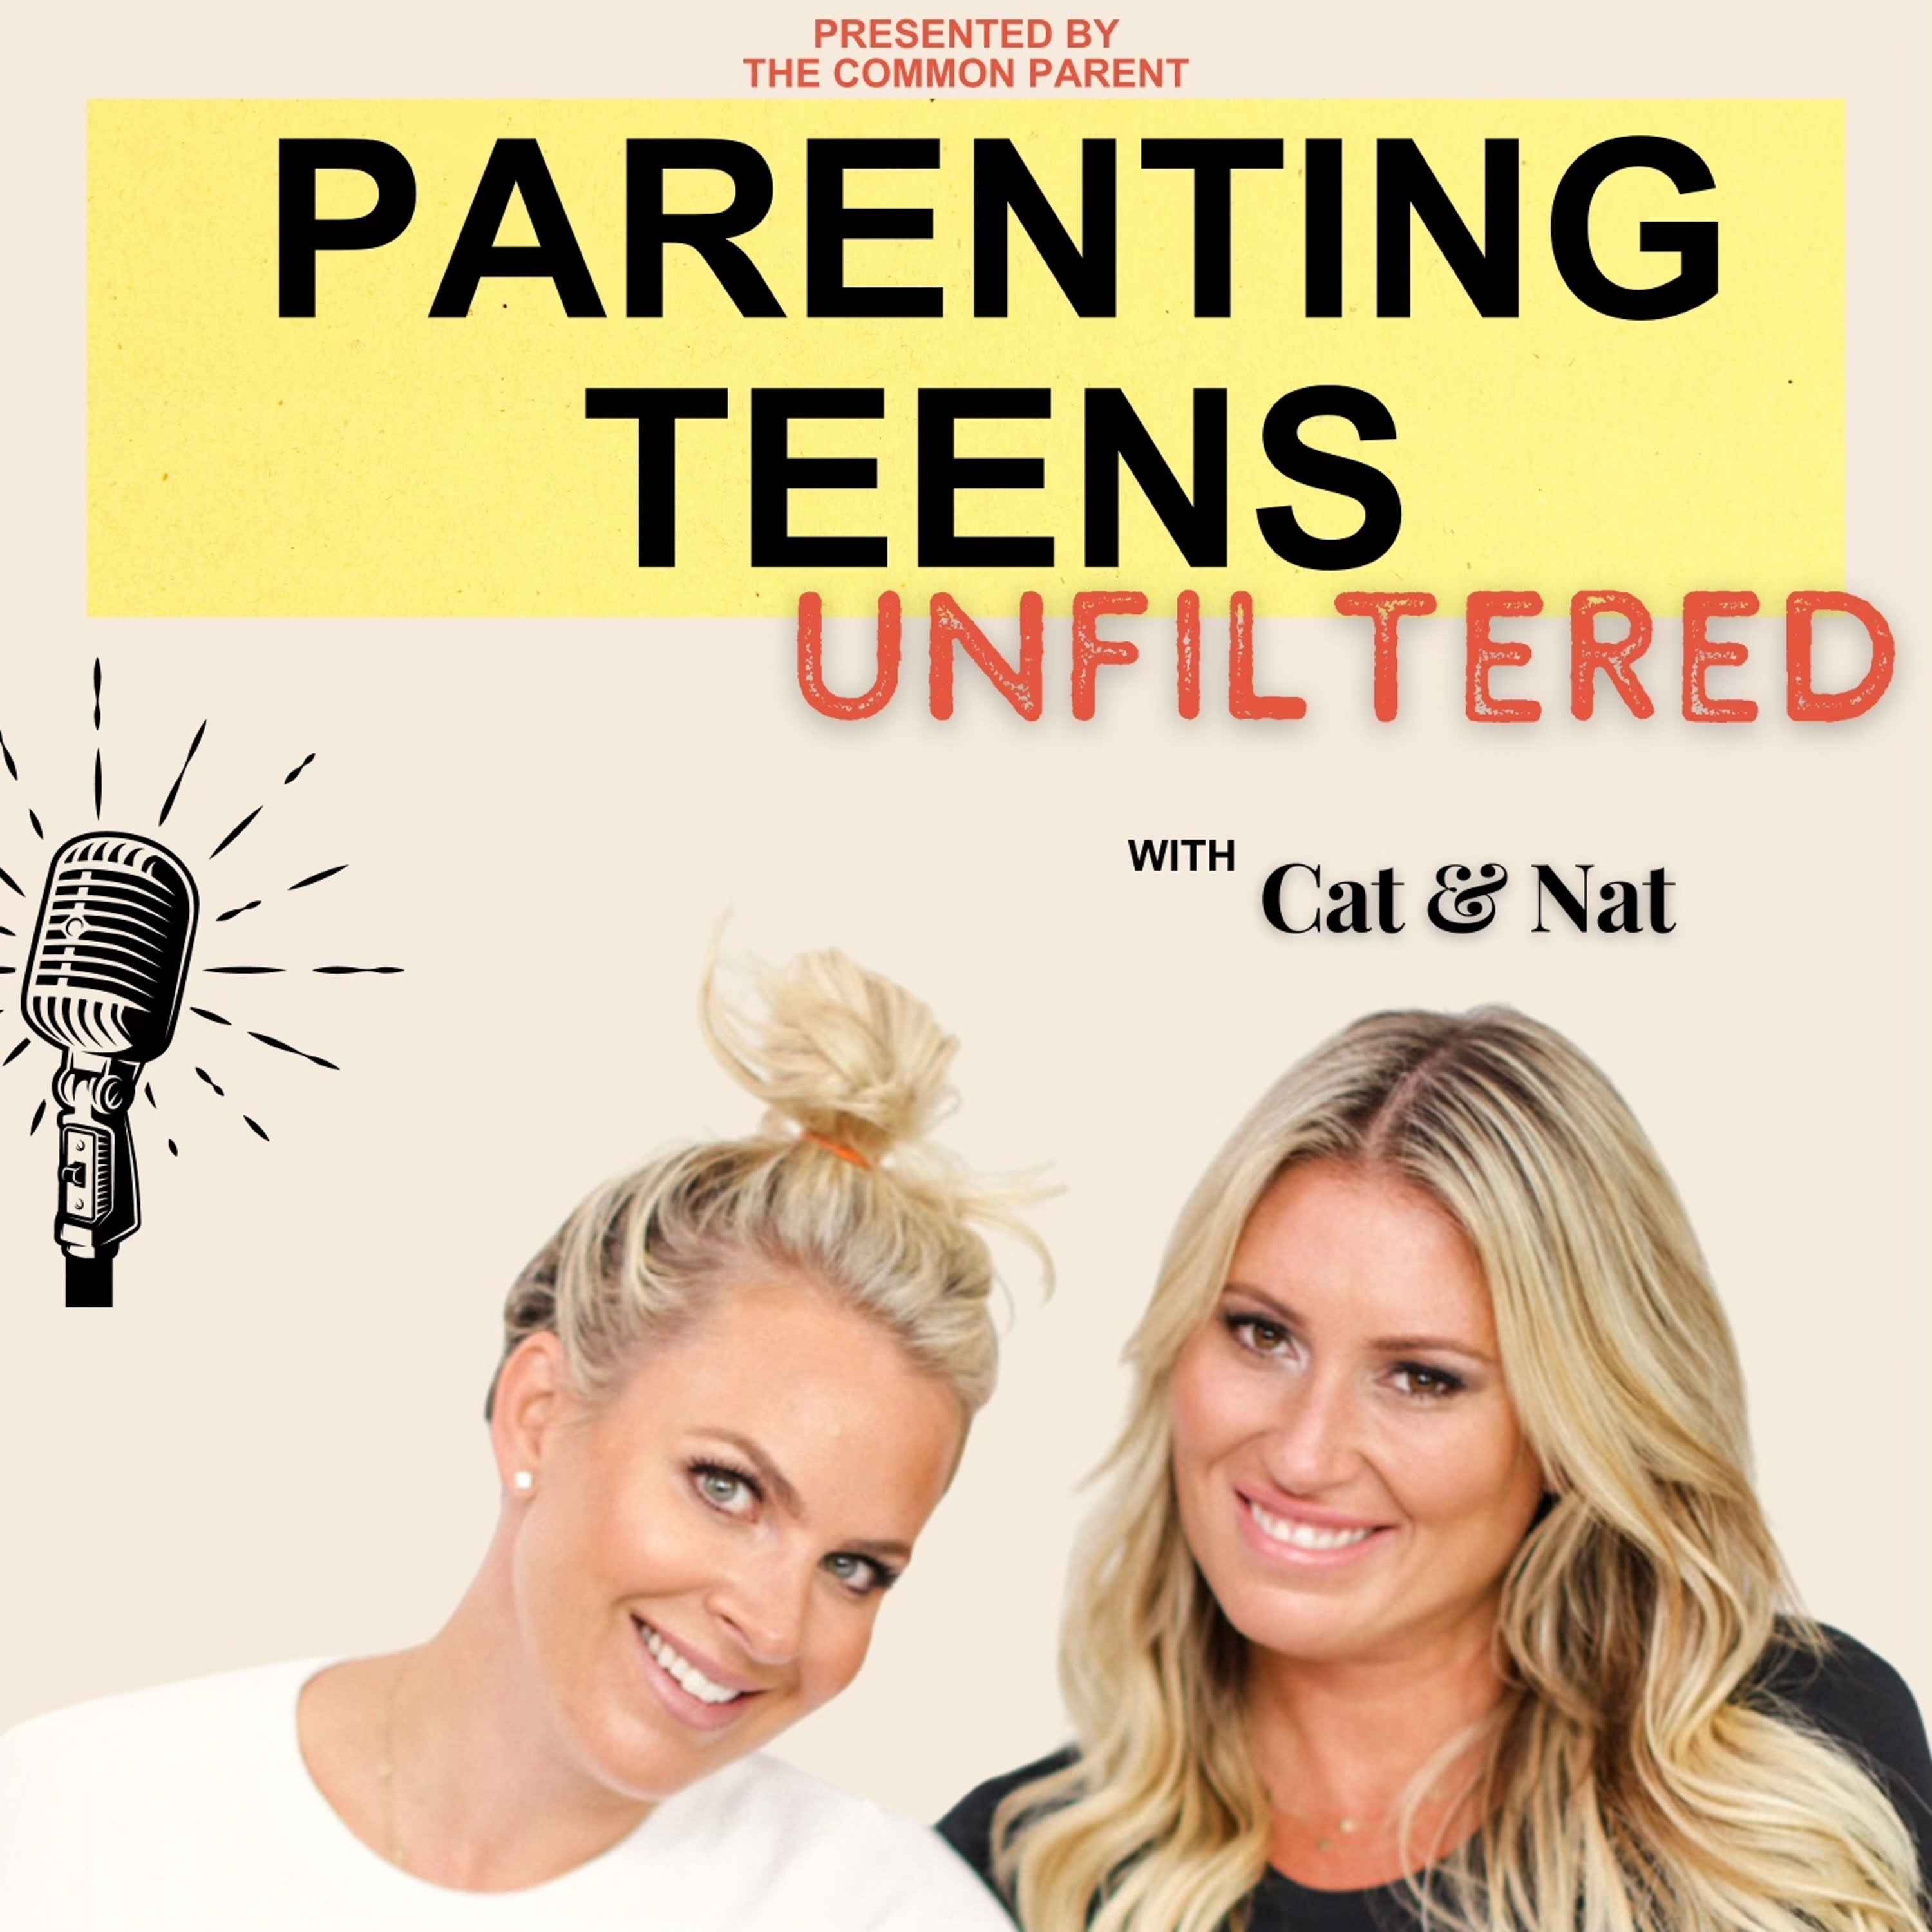 Parenting Teens Unfiltered: Lying and Gaslighting with Dr. Deborah Vinall